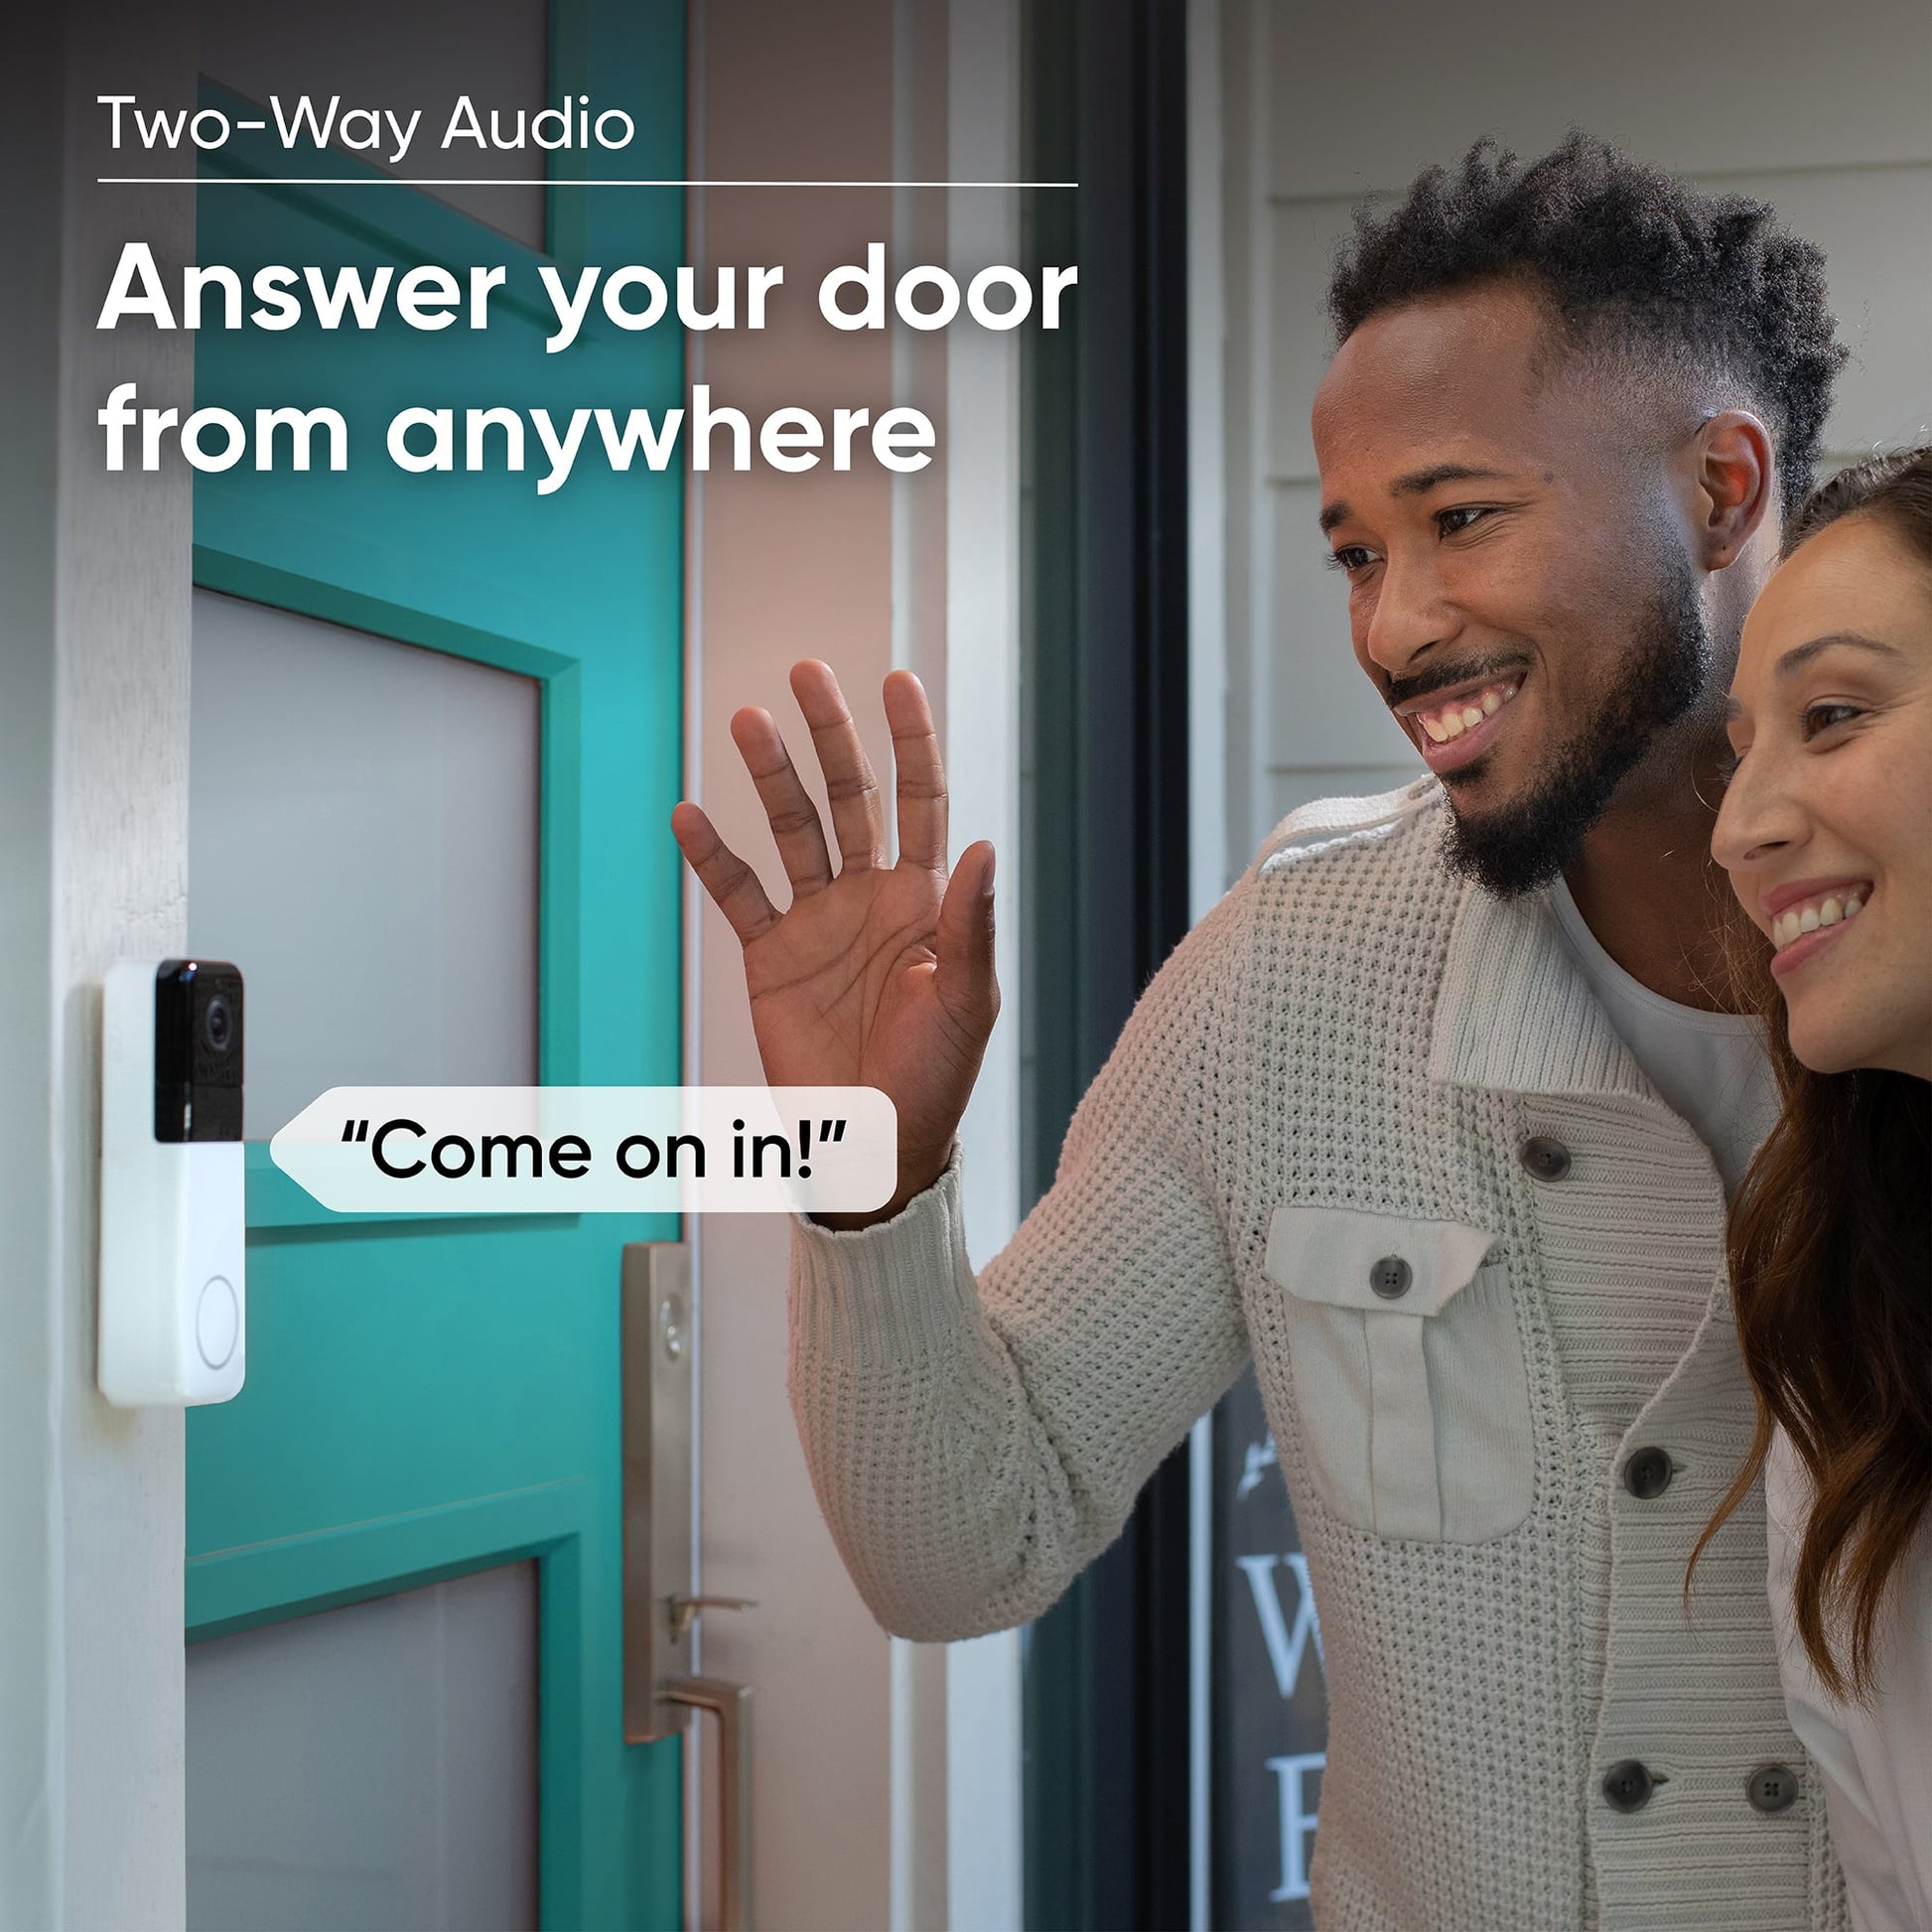 Ring Video Doorbell Wired: Delightful Value for the Money